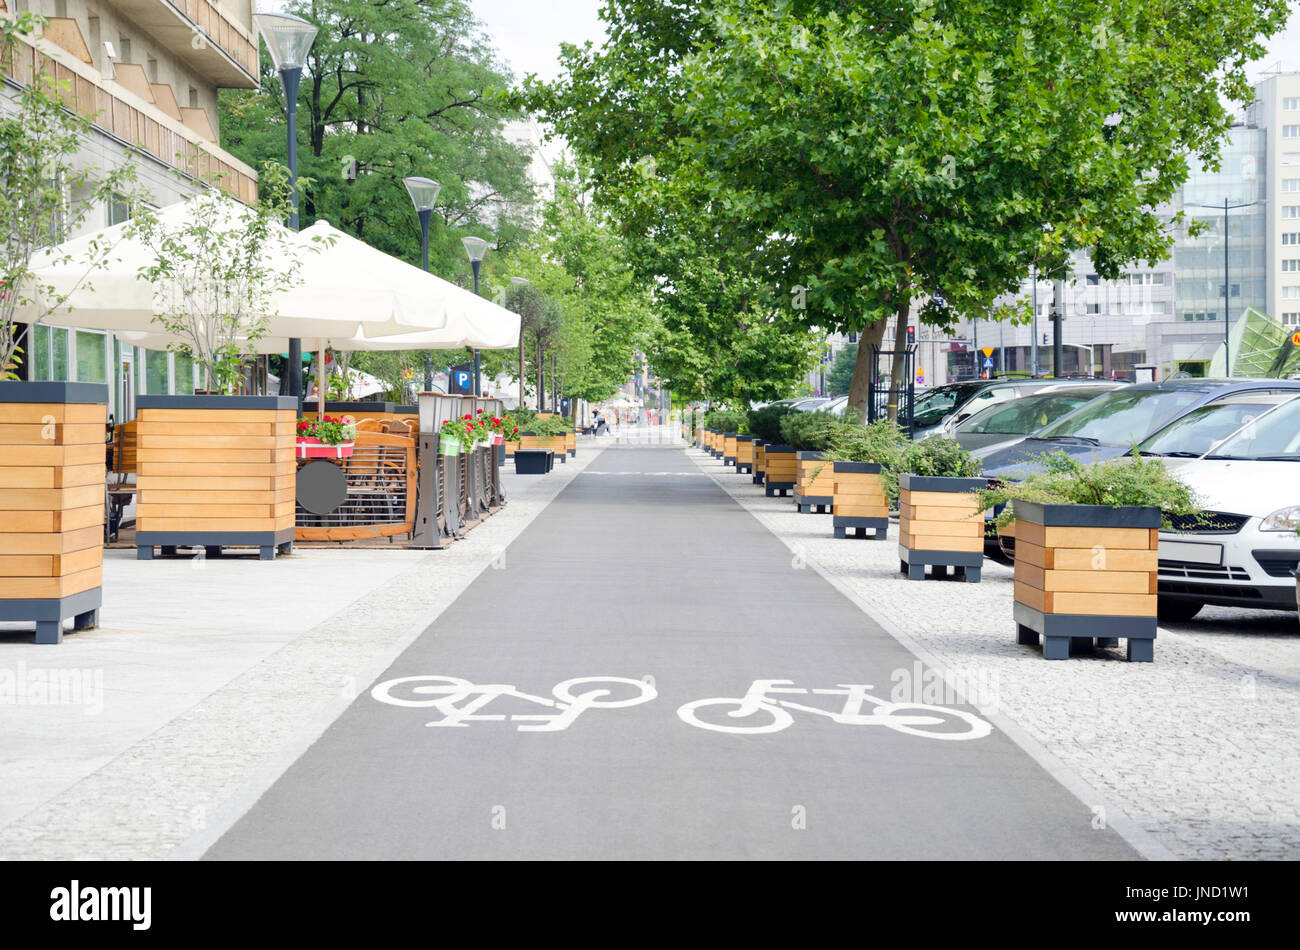 City street with long bicycle lane near outdoor cafe Stock Photo